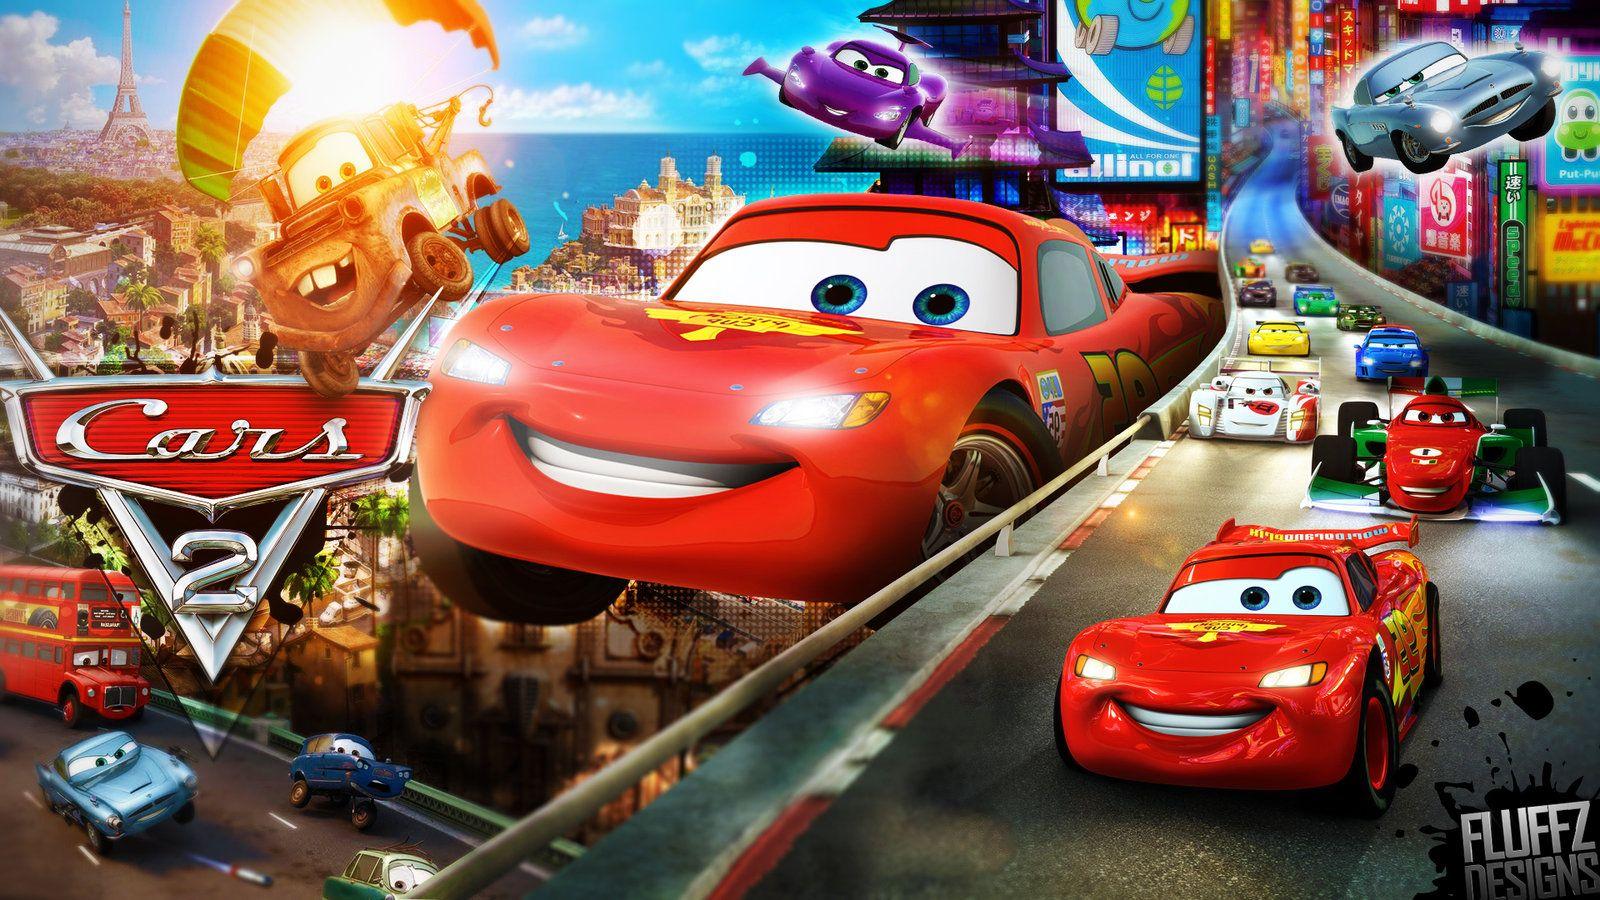 Disney Cars Wallpaper For Android